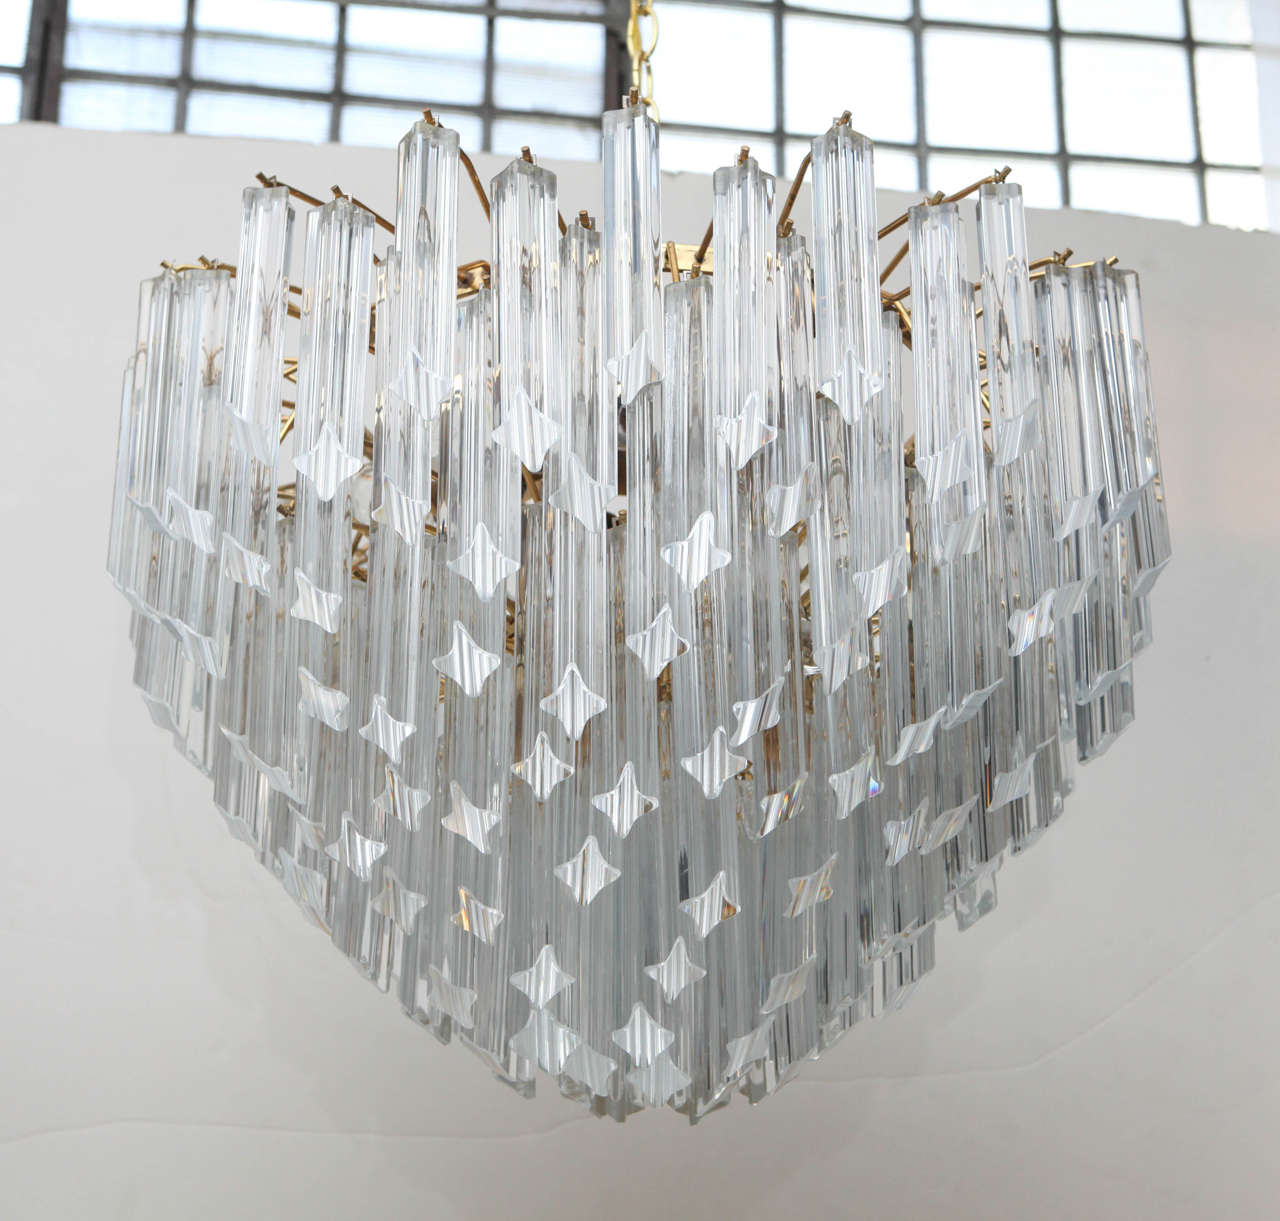 172 handblown vintage Venini Murano bullet prisms create this stunning and sophisticated chandelier.